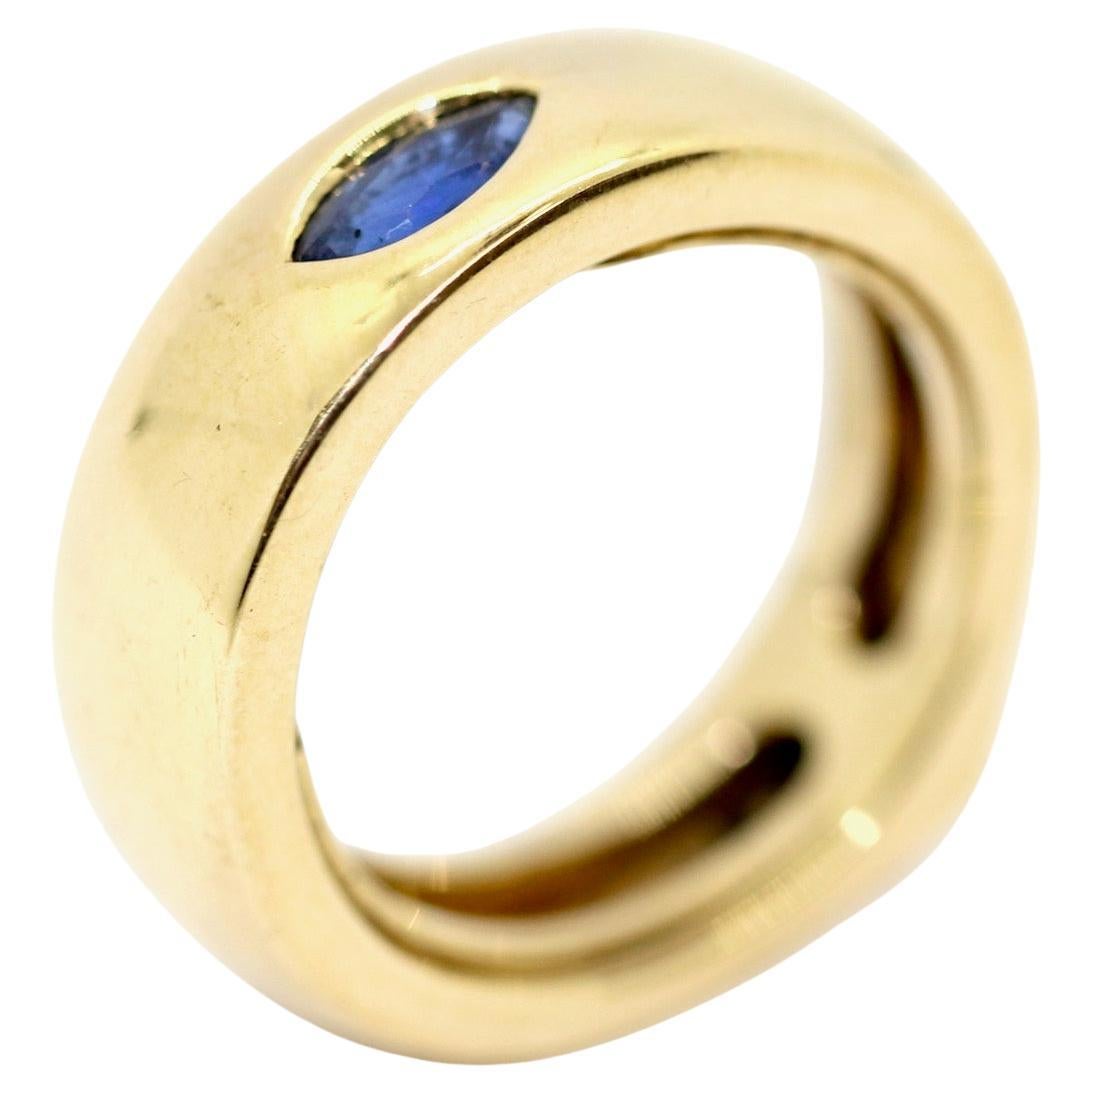 Designer Ring by Kat Florence, 18 Karat Yellow Gold with Blue Marquise Sapphire